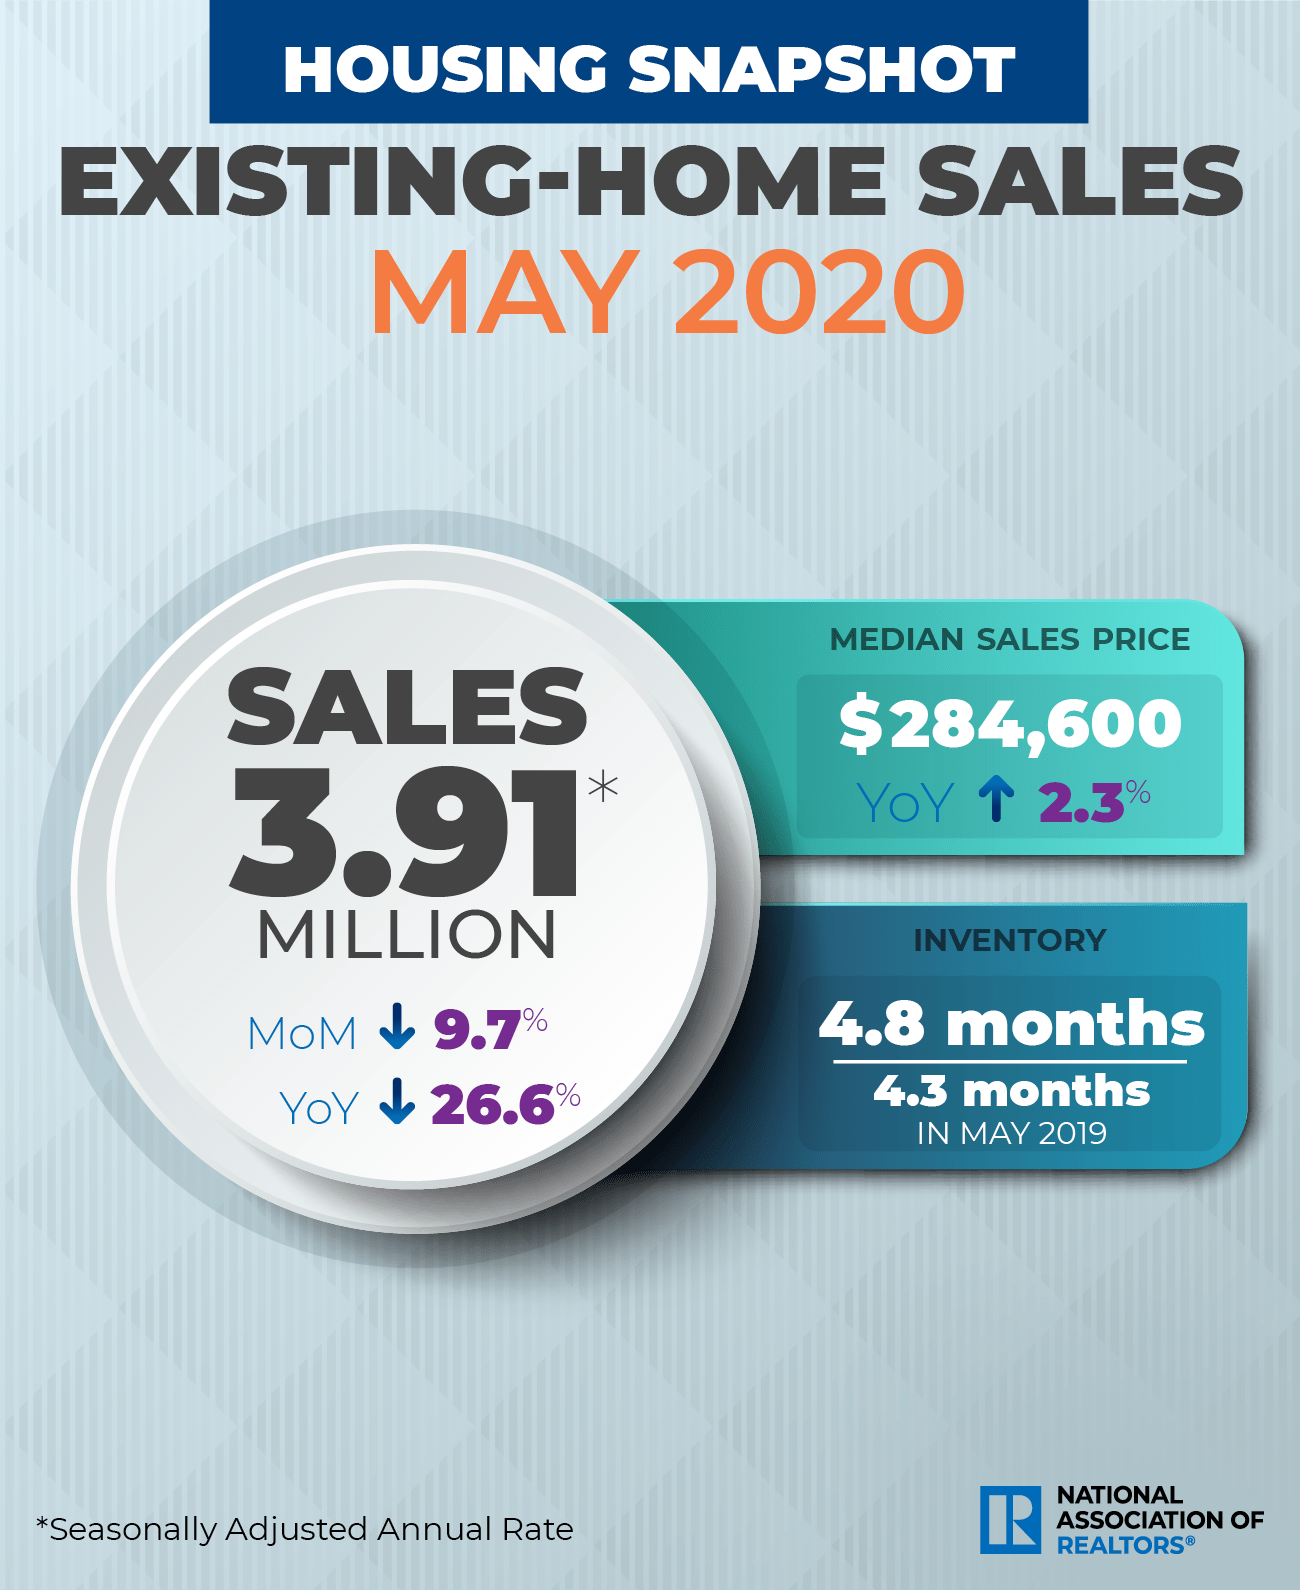 The National Association of Realtors reported a 9.7% drop in existing-home sales in May 2020 and a year-over-year decline of 26.6%, however, there could be hope on the horizon